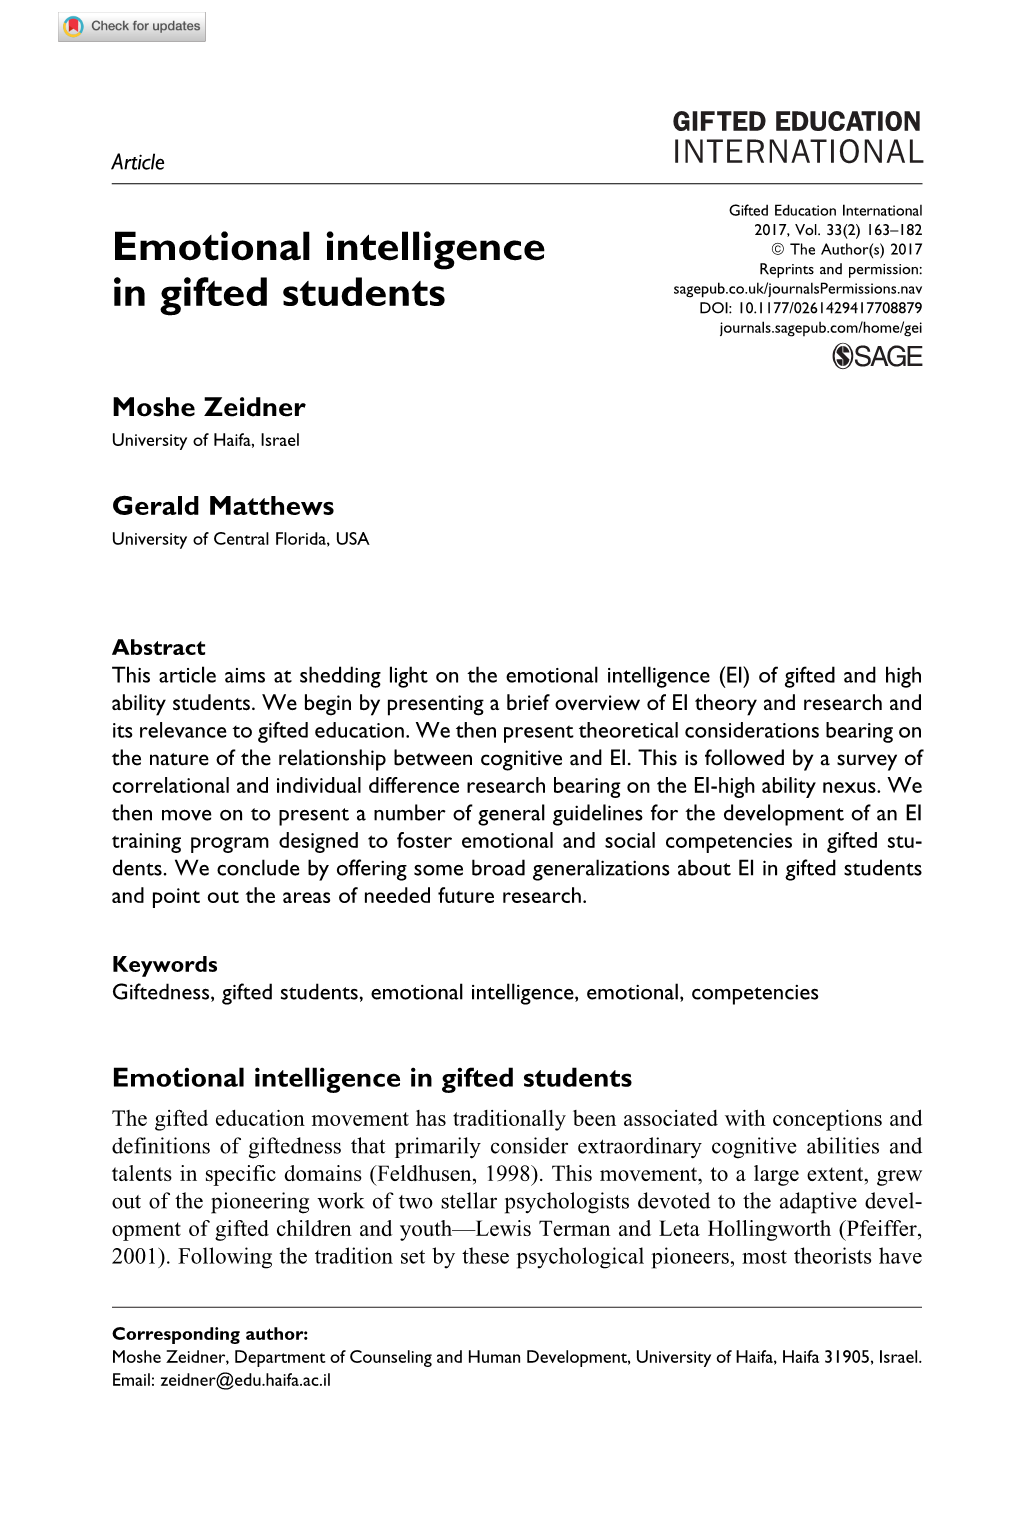 Emotional Intelligence in Gifted Students